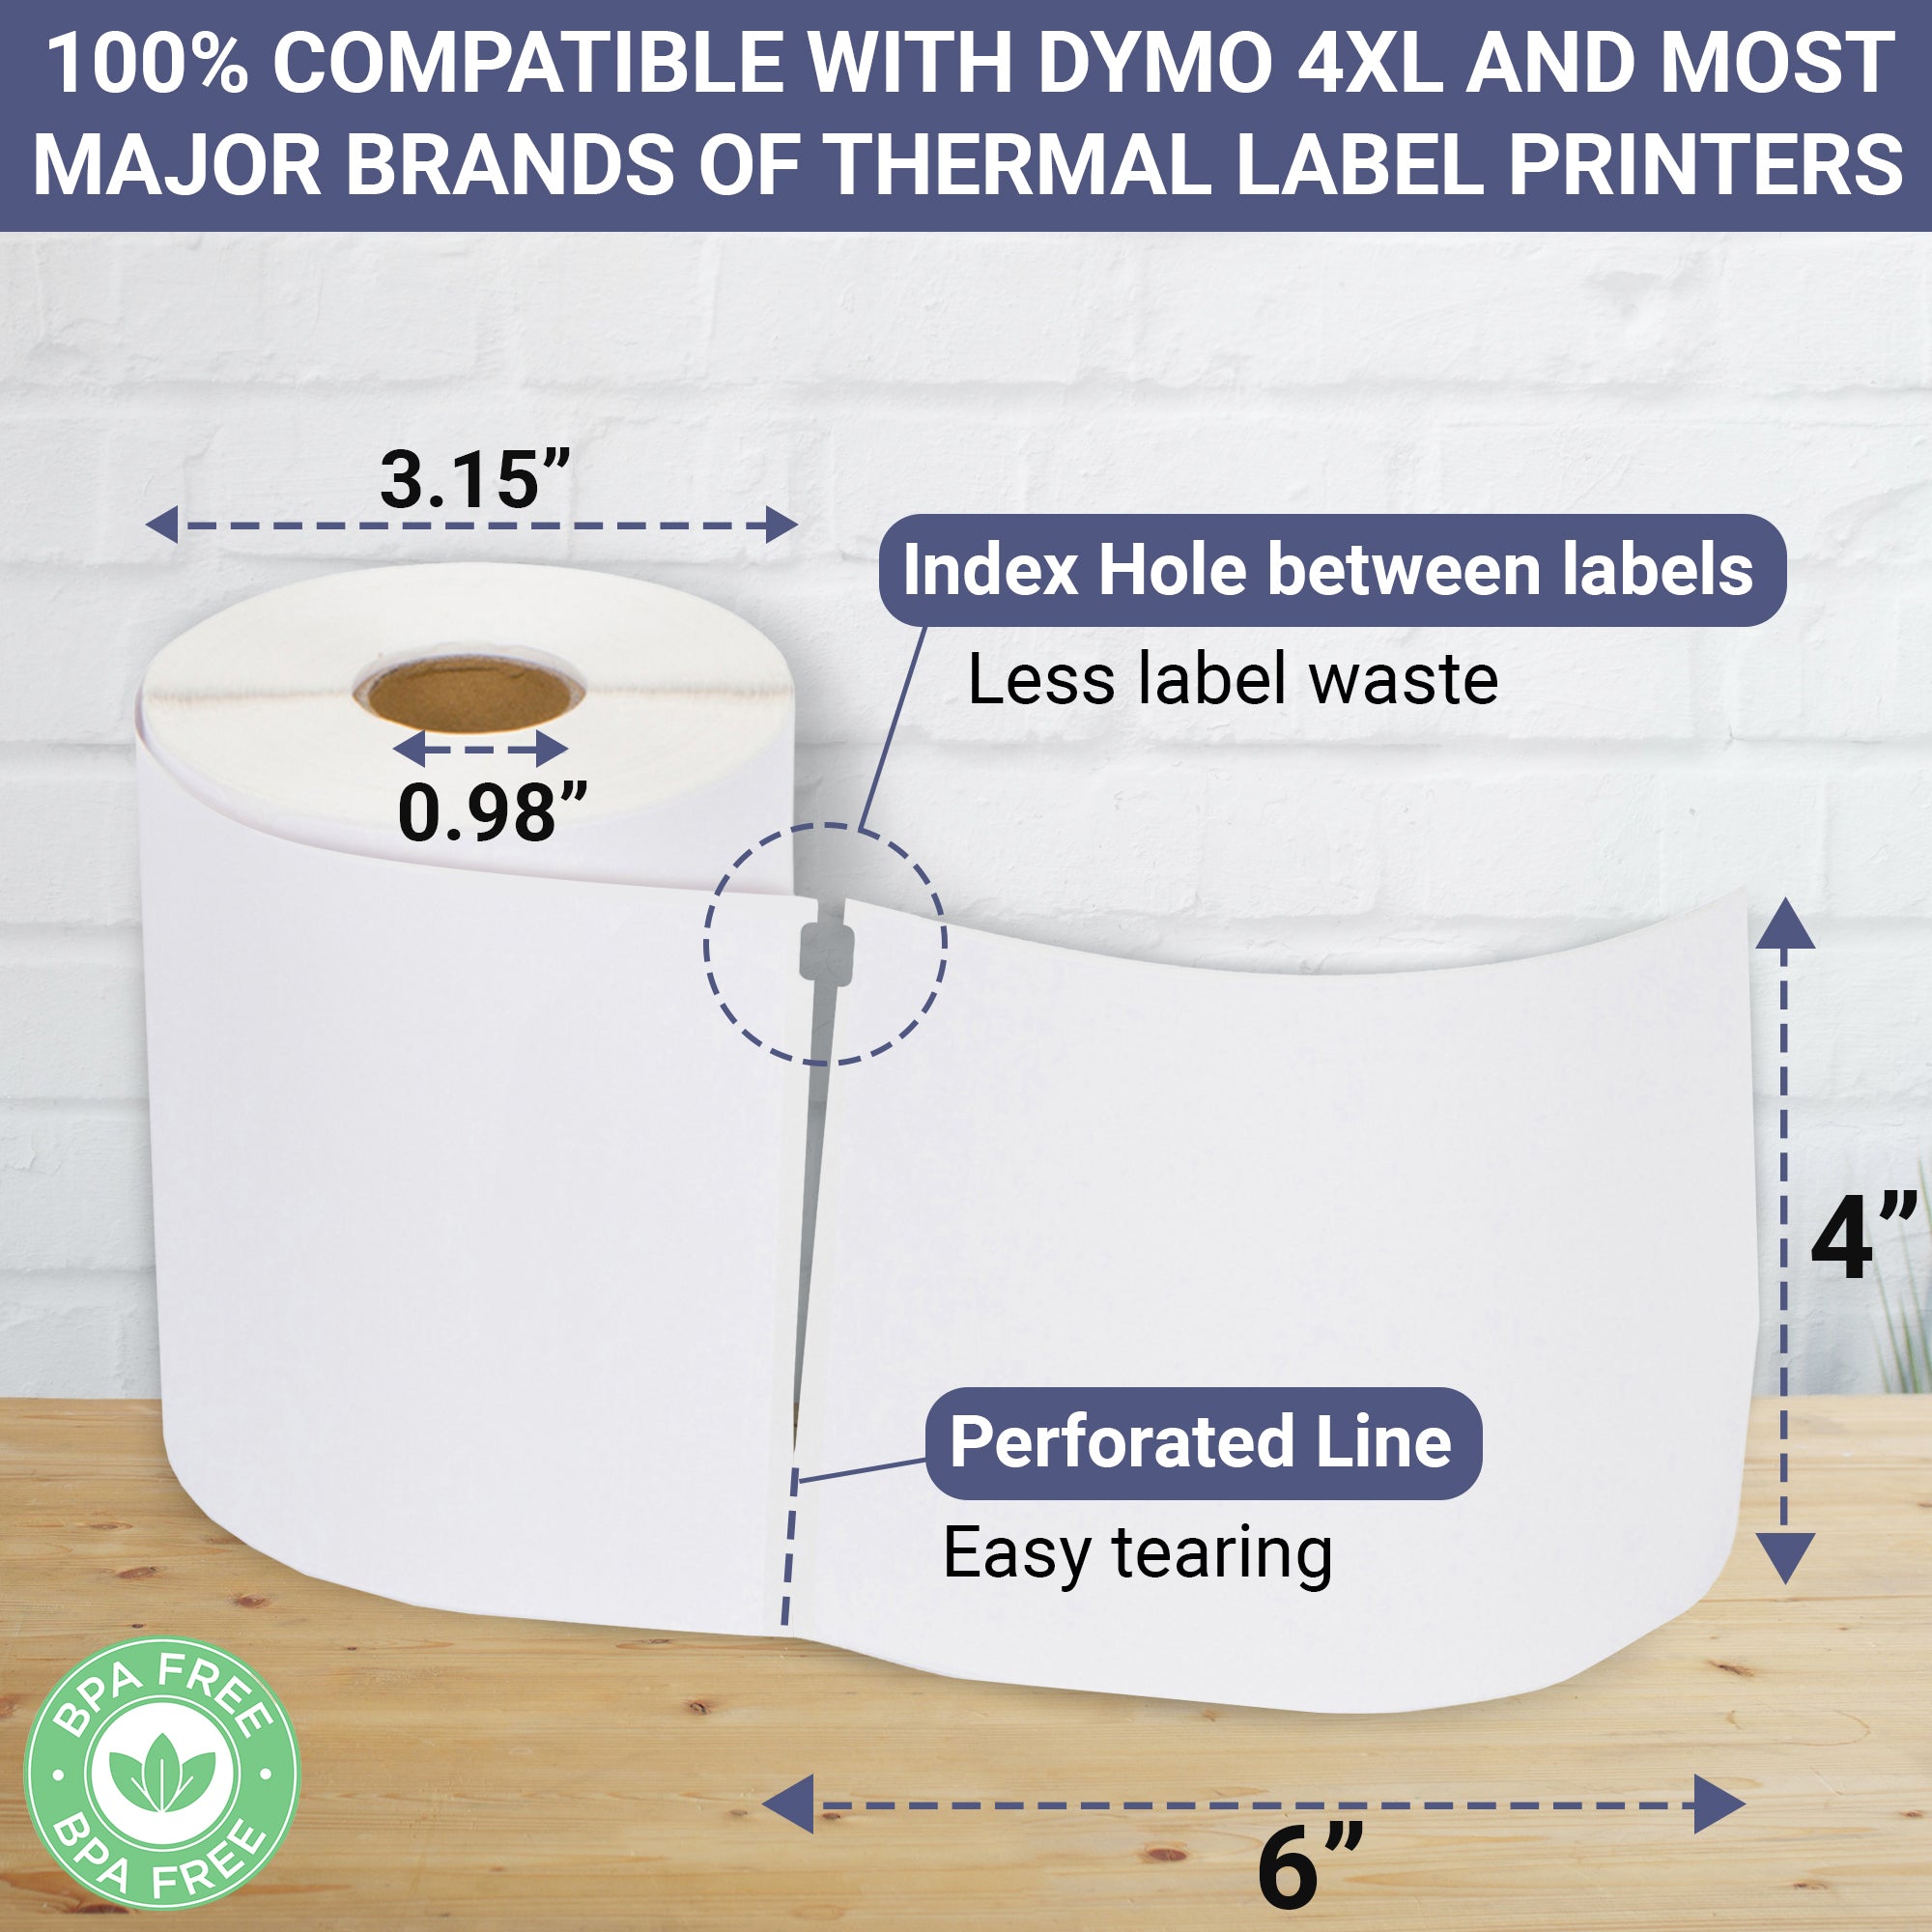 DYMO LabelWriter 4XL Thermal Label Printer for Shipping Labels